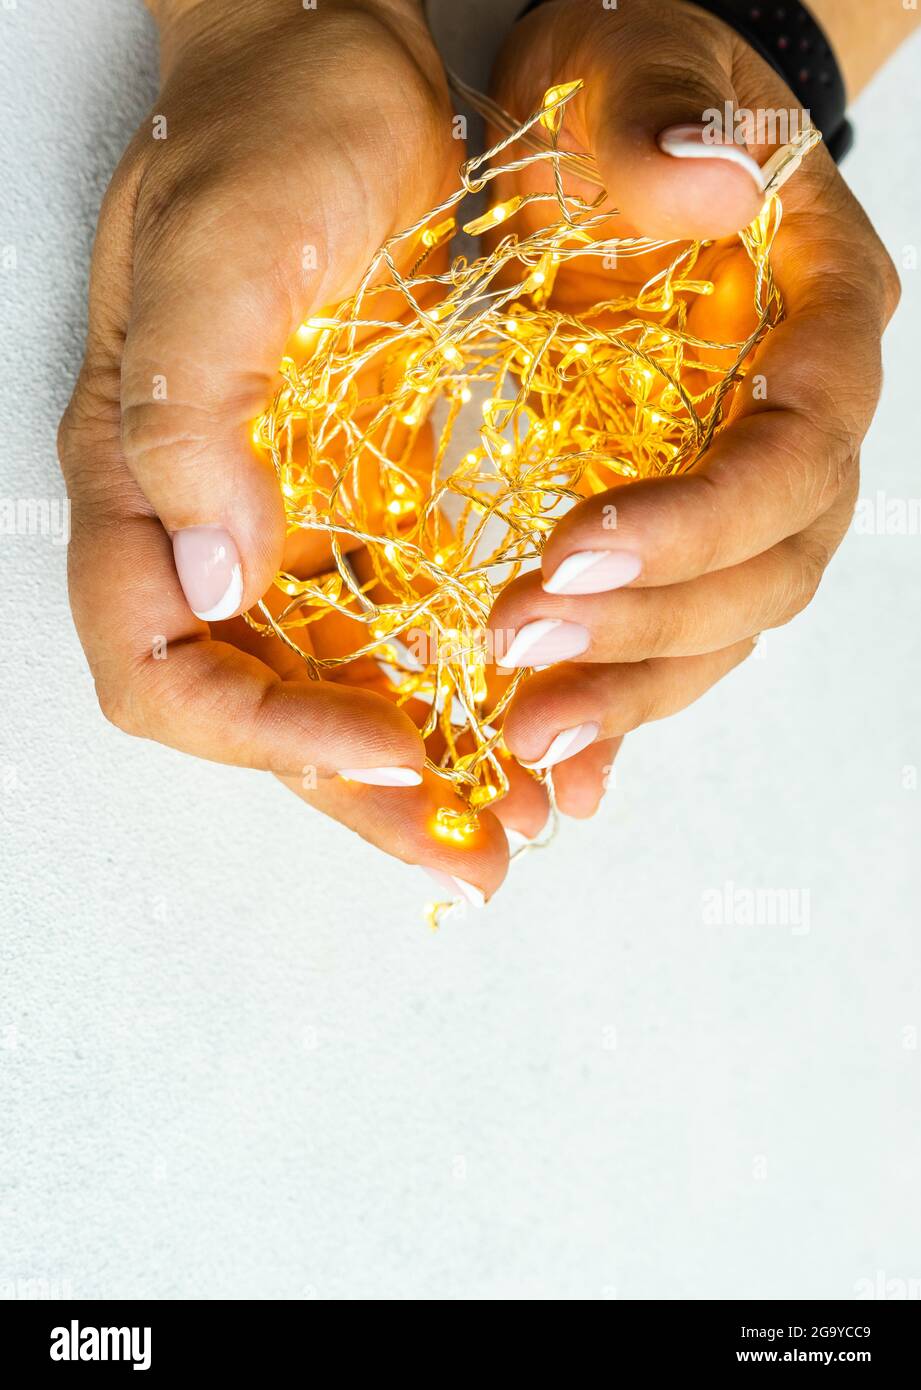 Close-up of woman's hands holding illuminated string lights Stock Photo